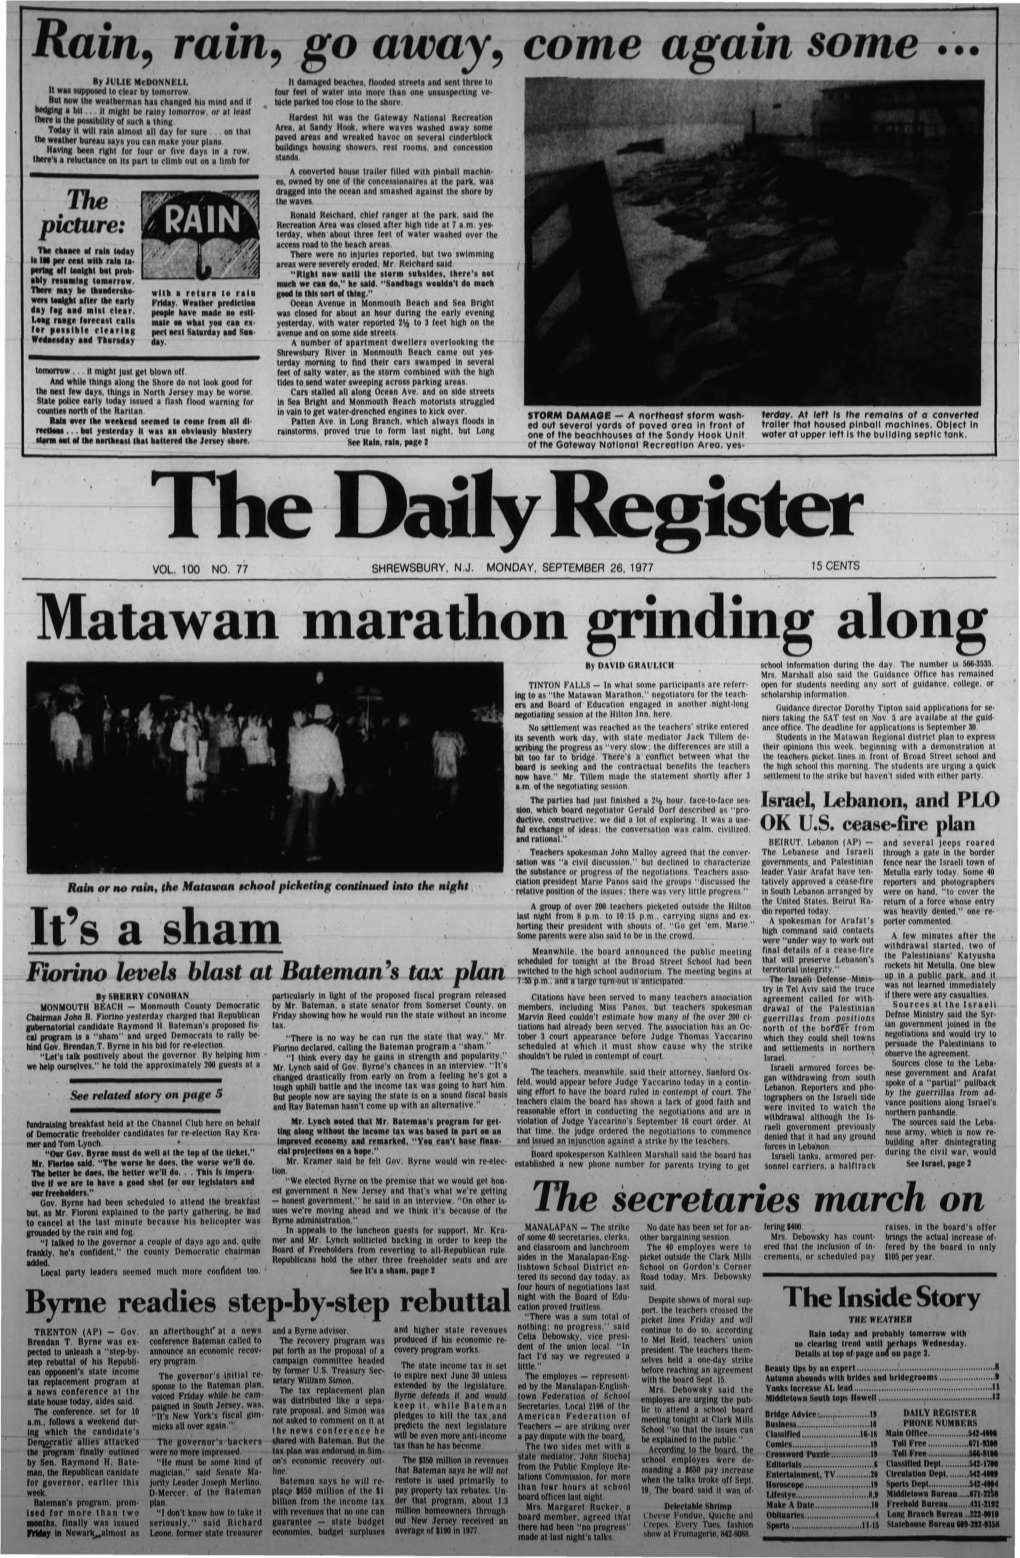 Matawan Marathon Grinding Along by DAVID I.It \1 IK II School Information During the Day the Number Is 566-3535